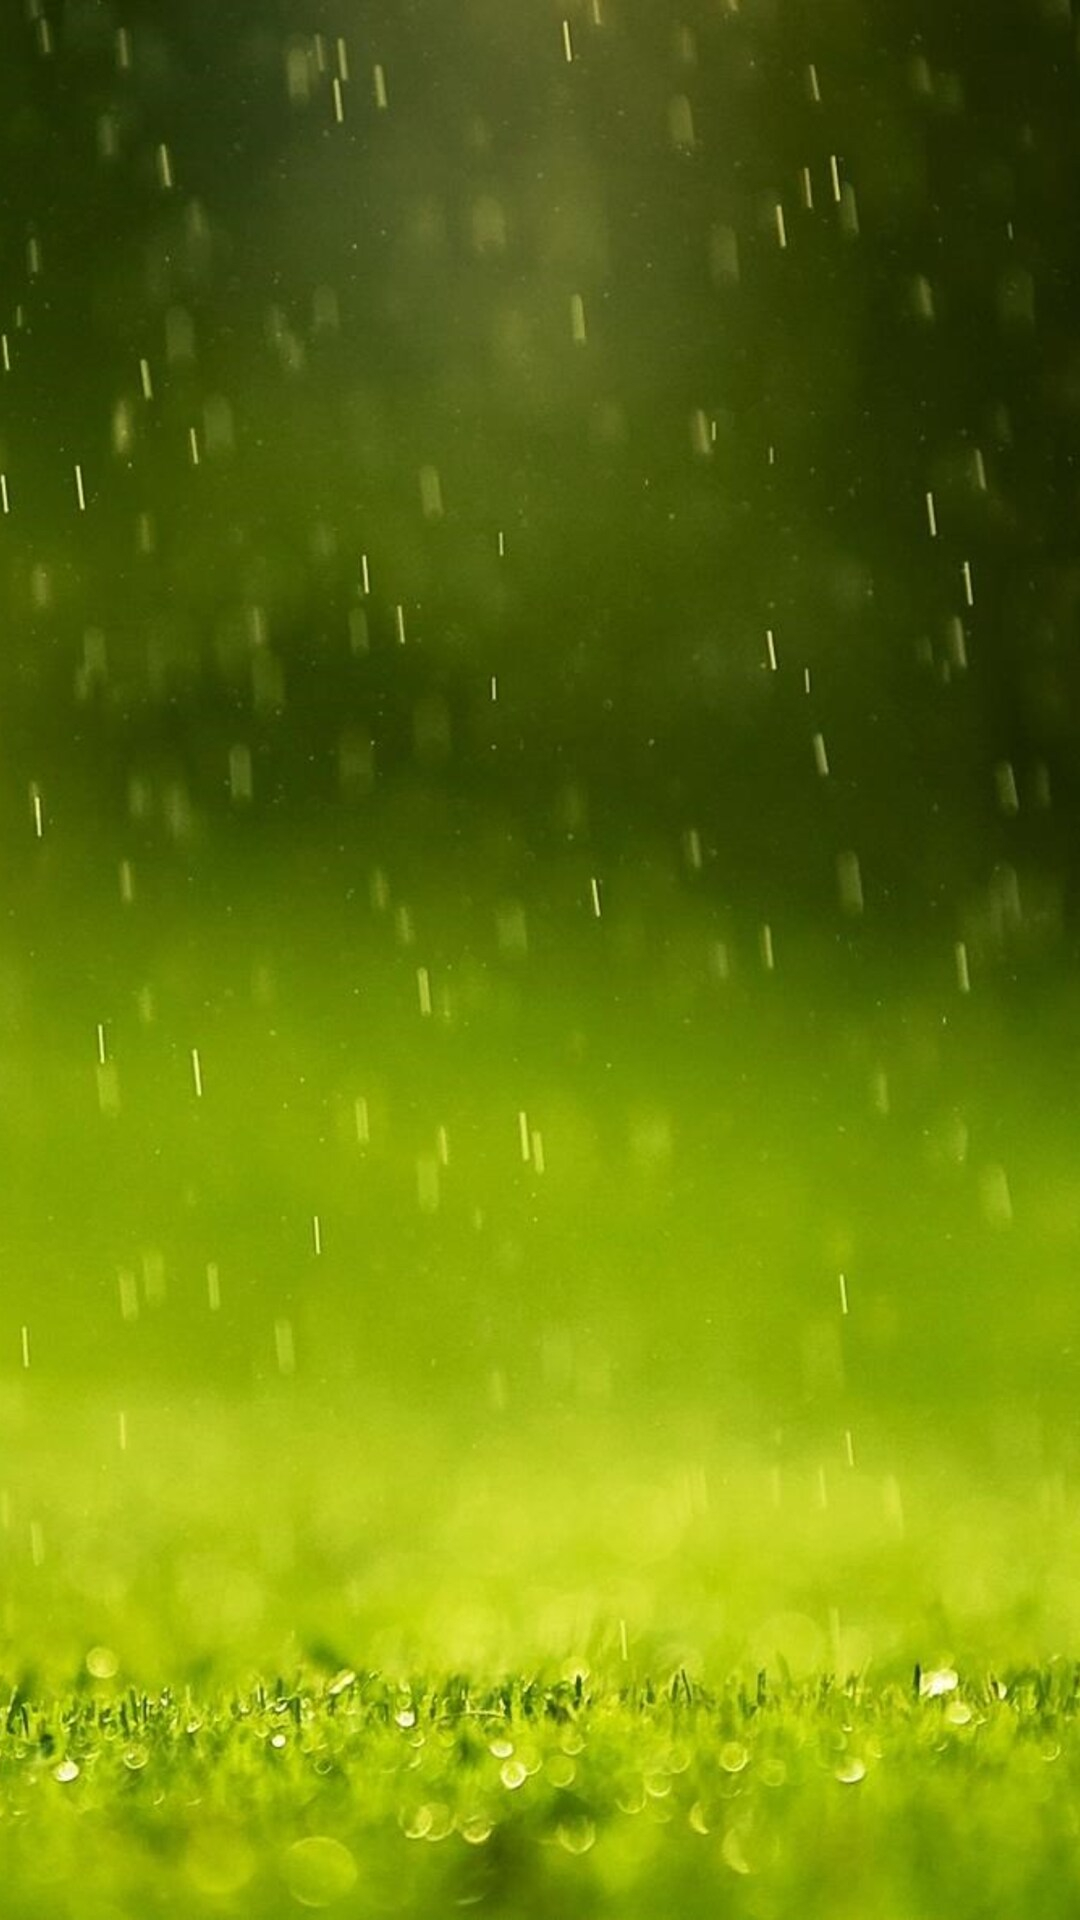 1080x1920 Beautiful Rain Drops Iphone 7,6s,6 Plus, Pixel xl ,One Plus 3,3t,5 HD 4k Wallpapers, Images, Backgrounds, Photos and Pictures